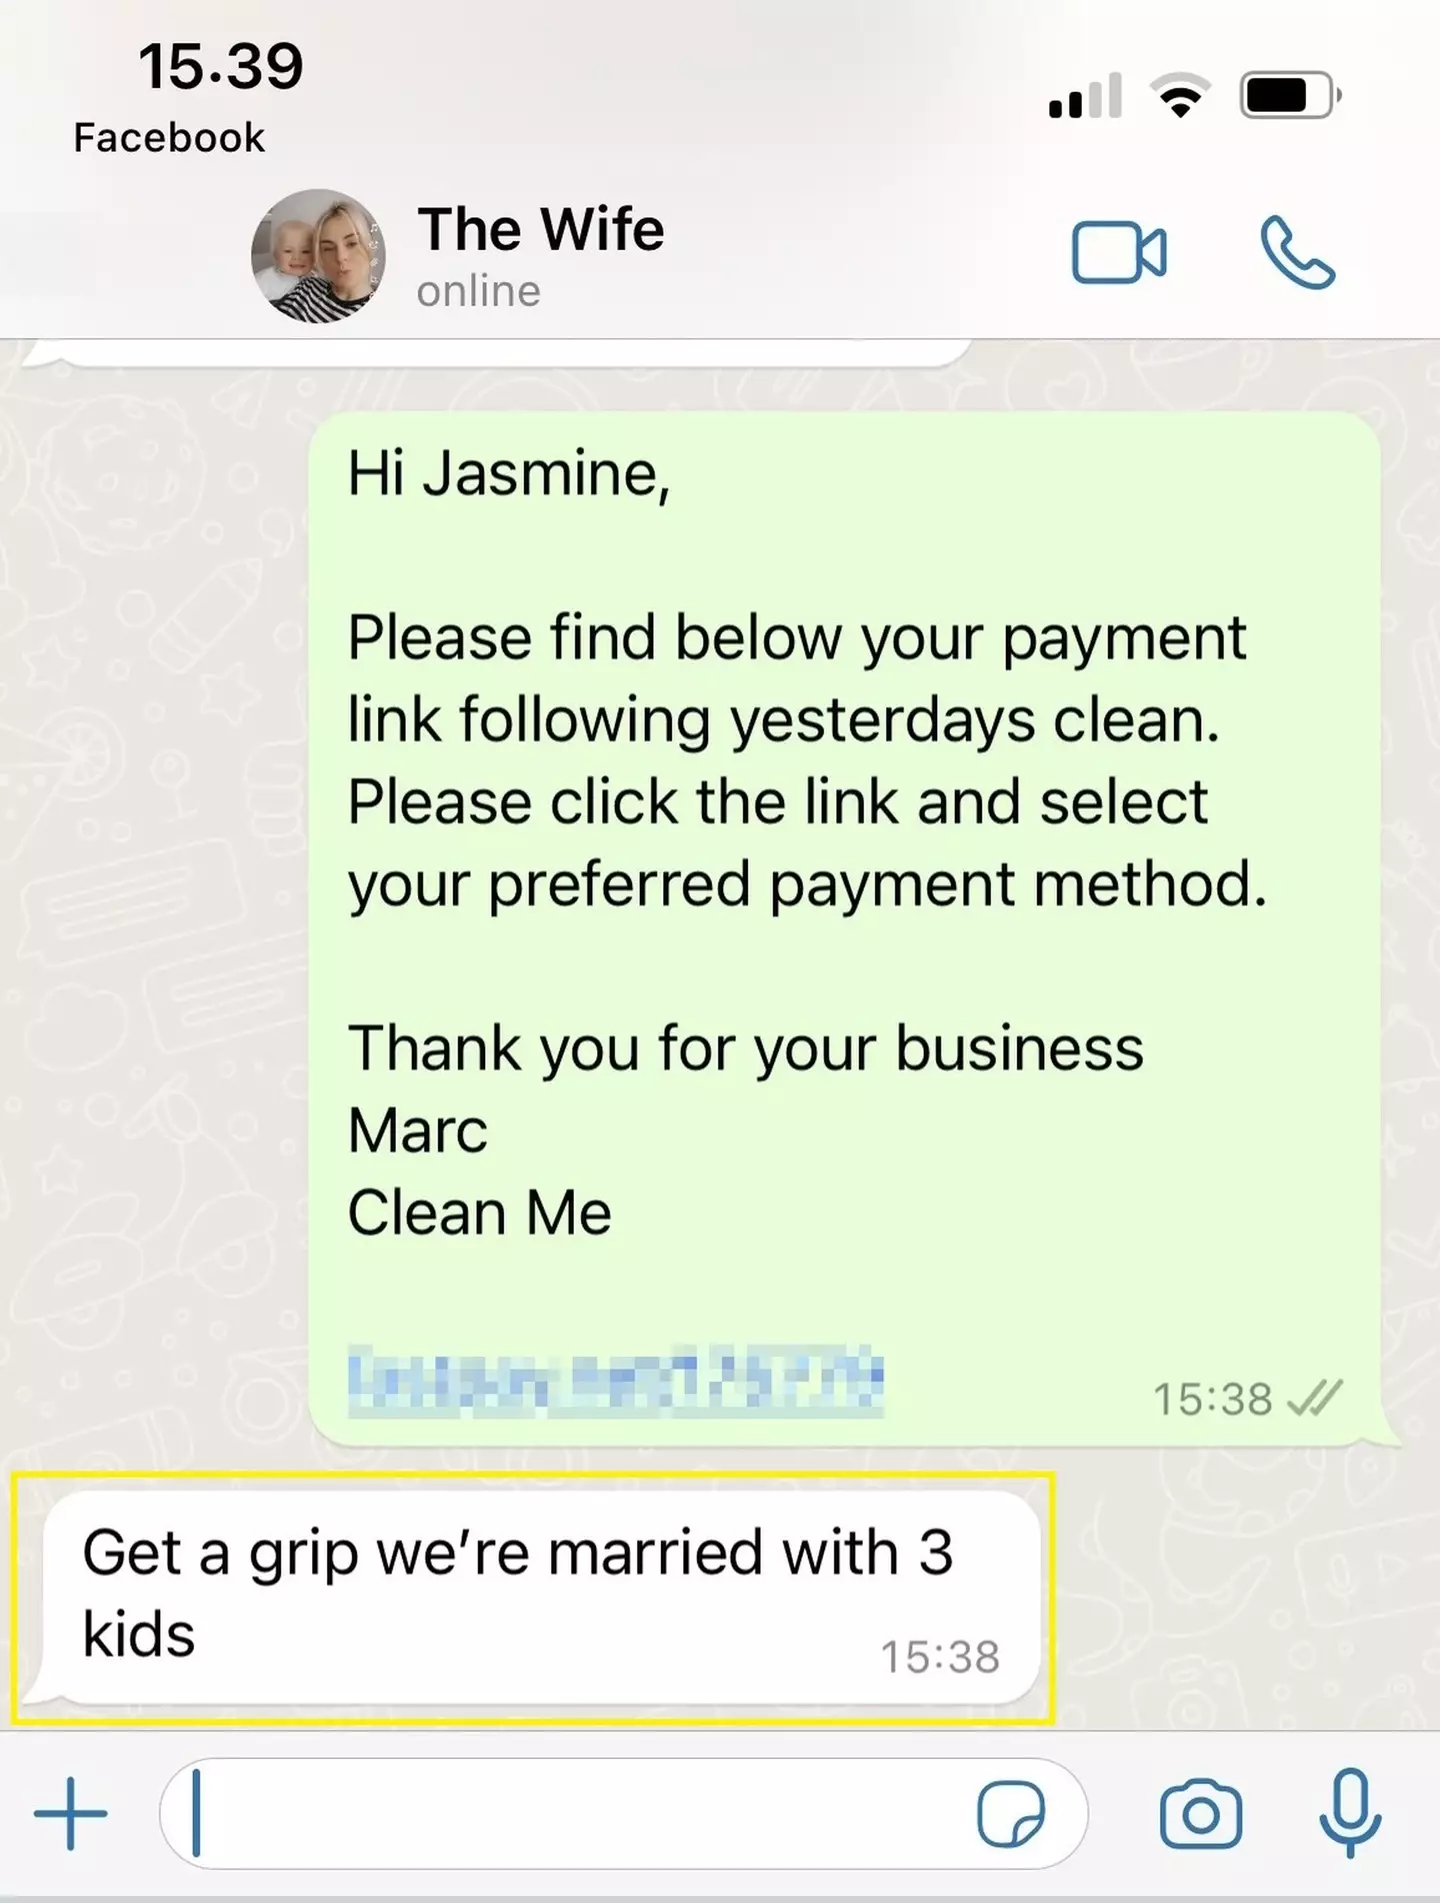 Marc's wife had a blunt response to his invoice.